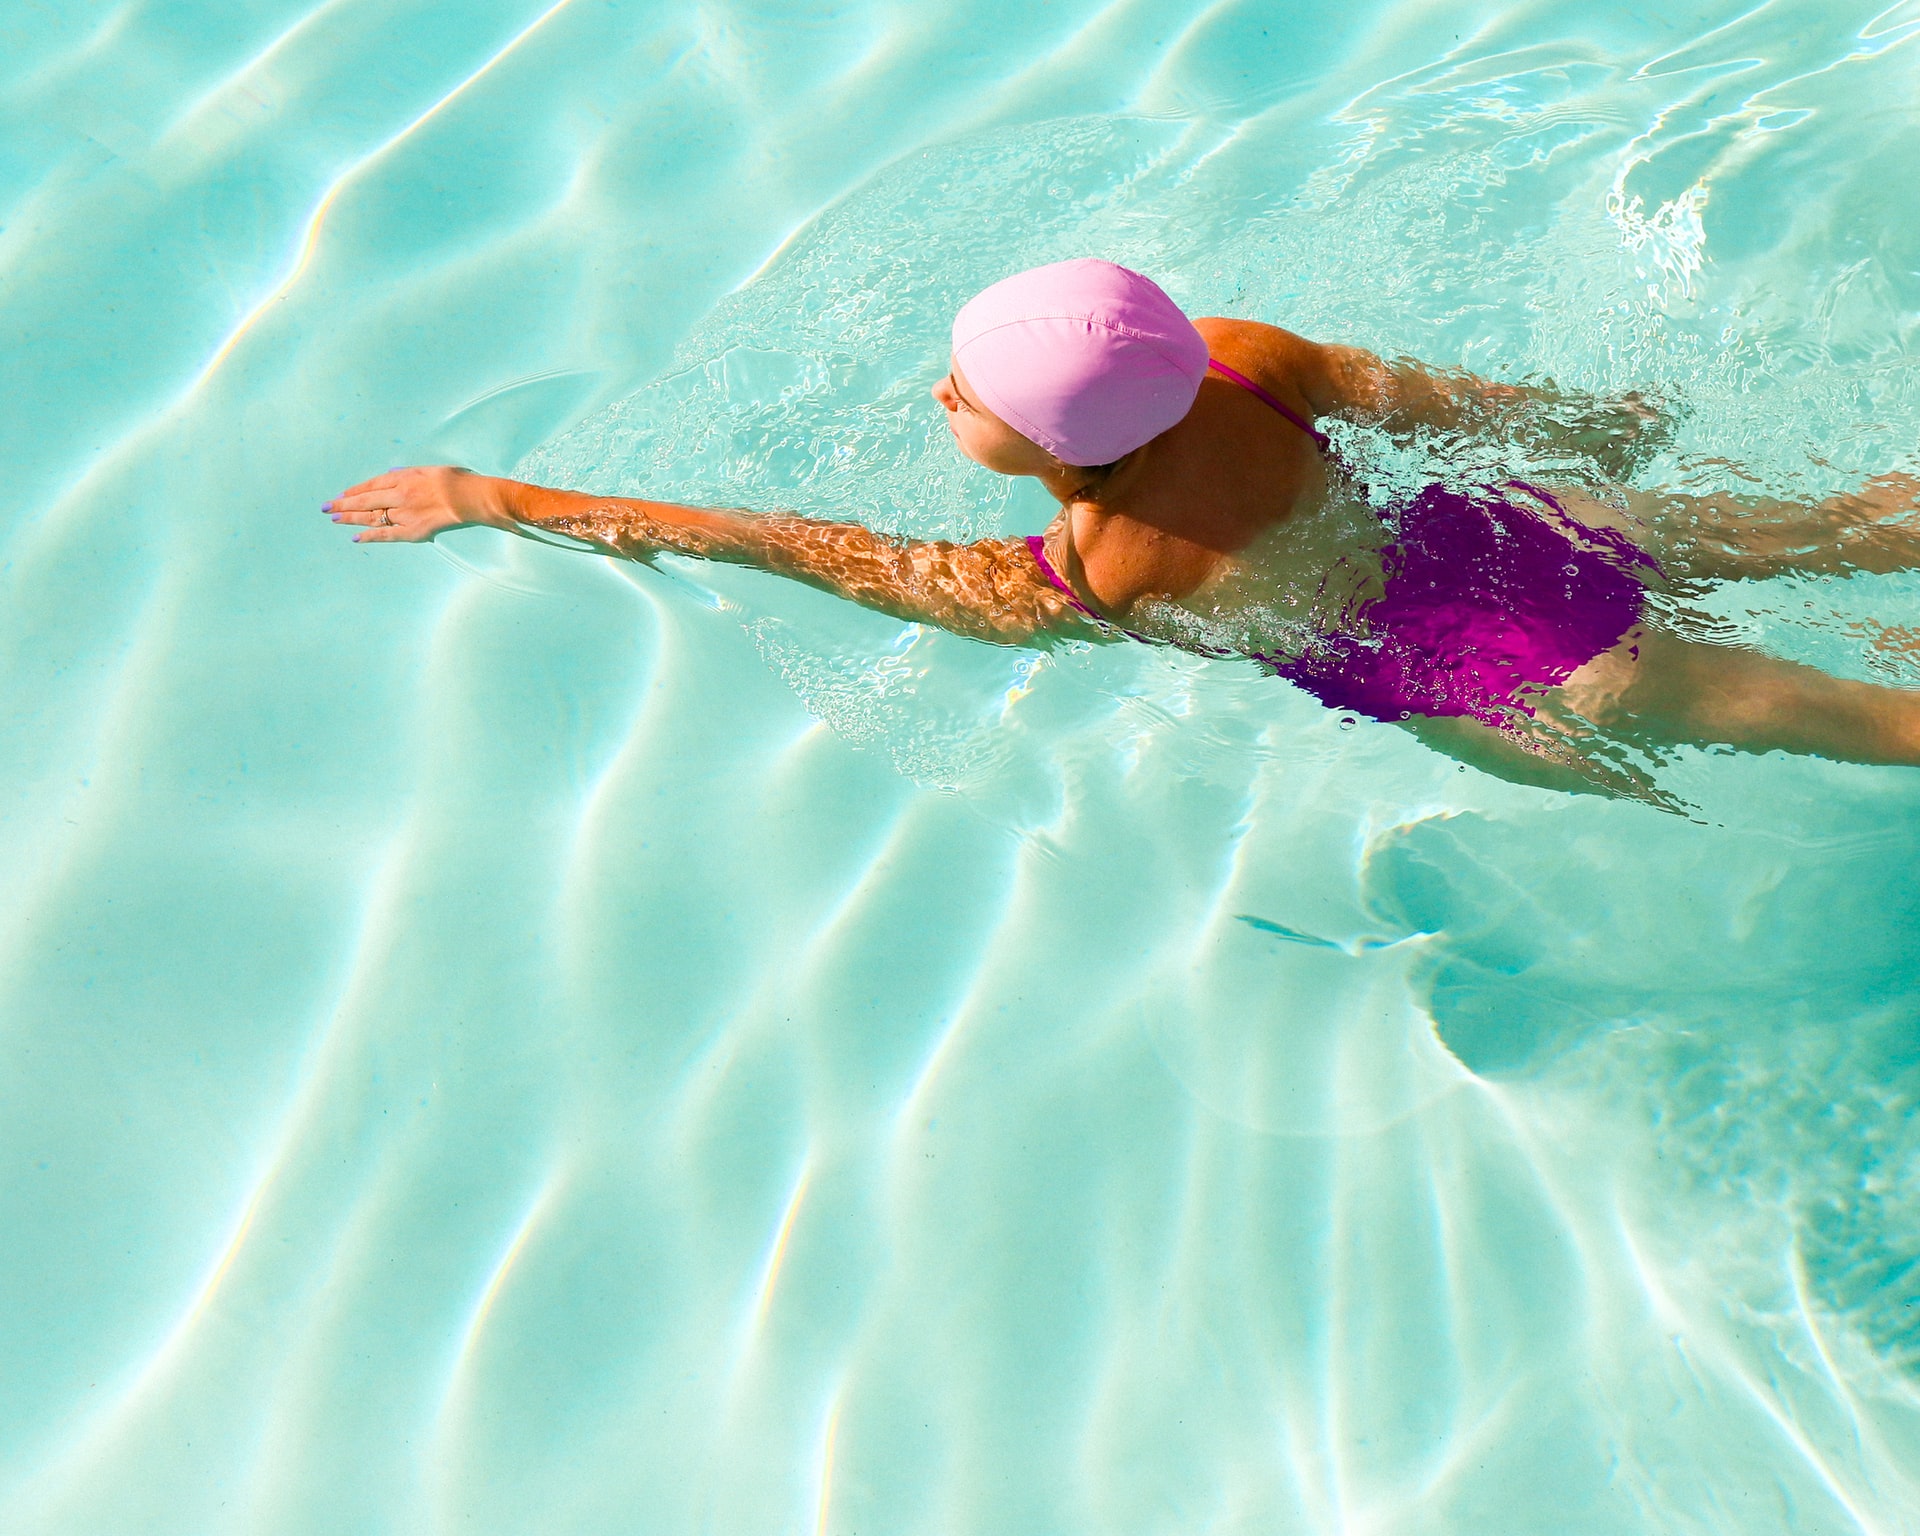 Become Better At Swimming With These 17 Tips